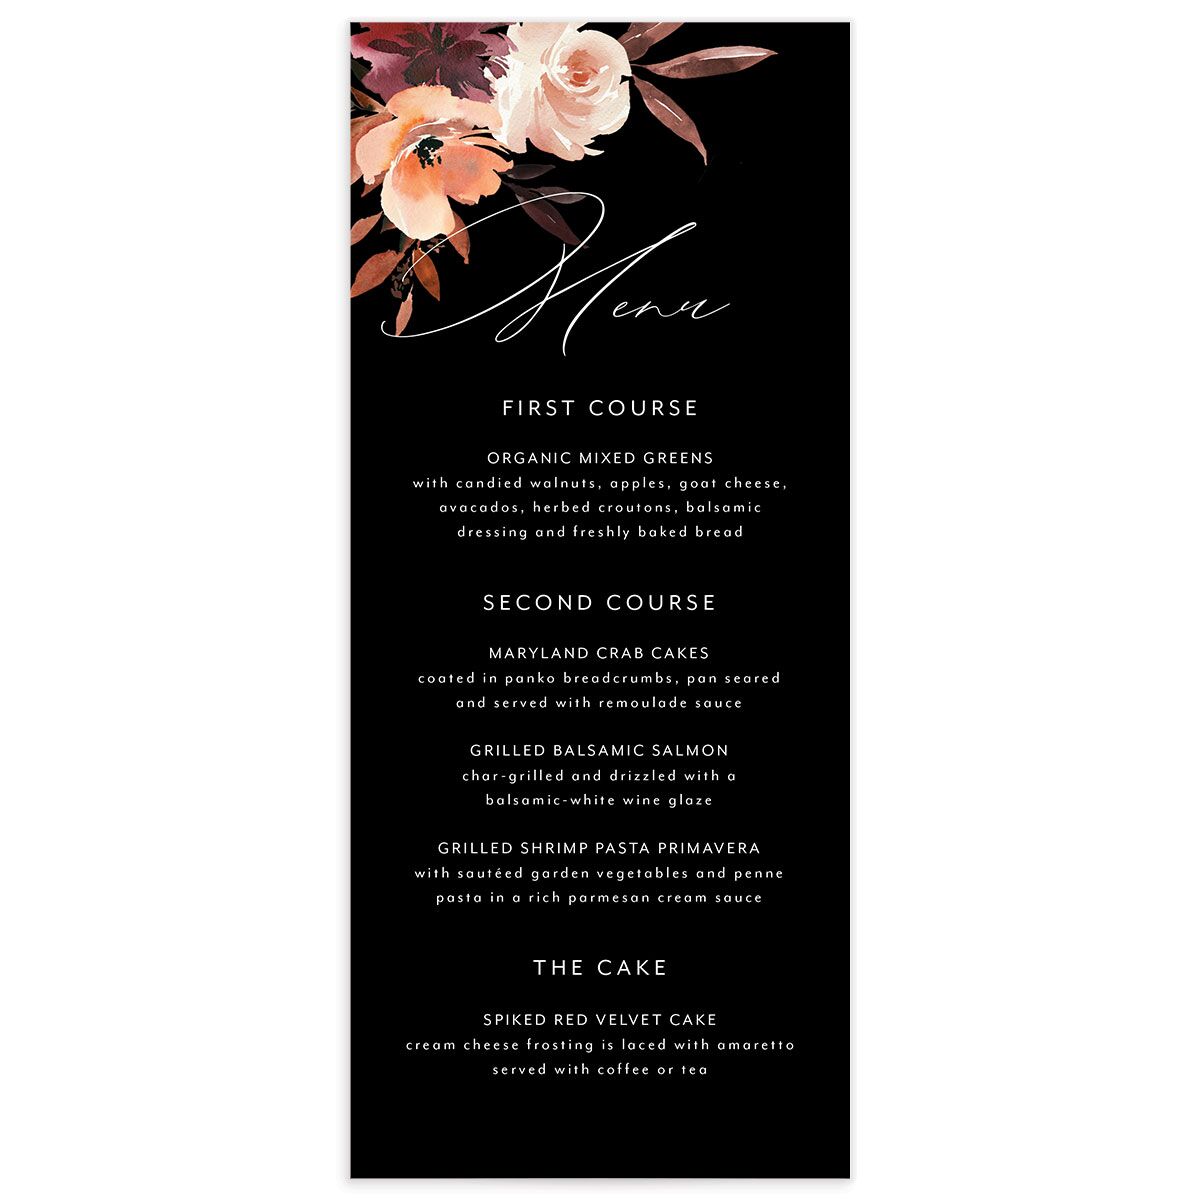 Painted Petals Menus [object Object] in Black